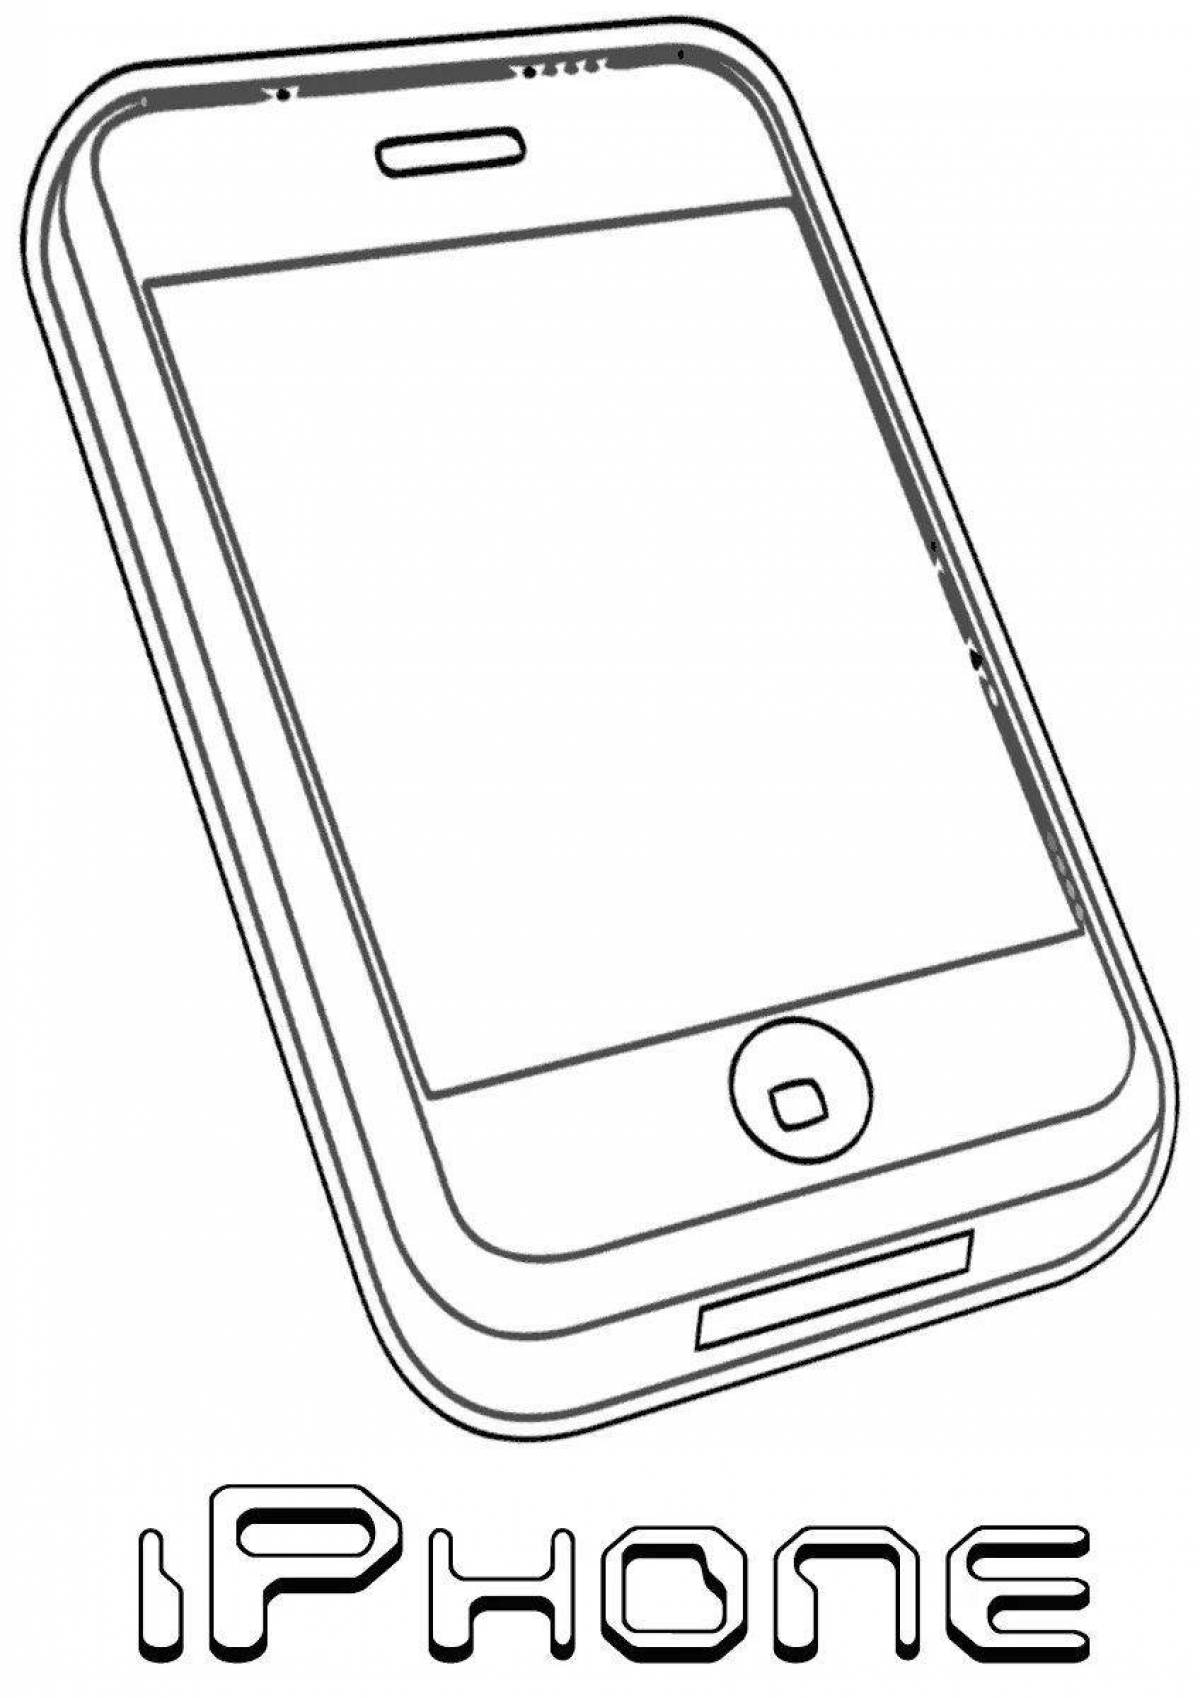 Innovative phone screen coloring page